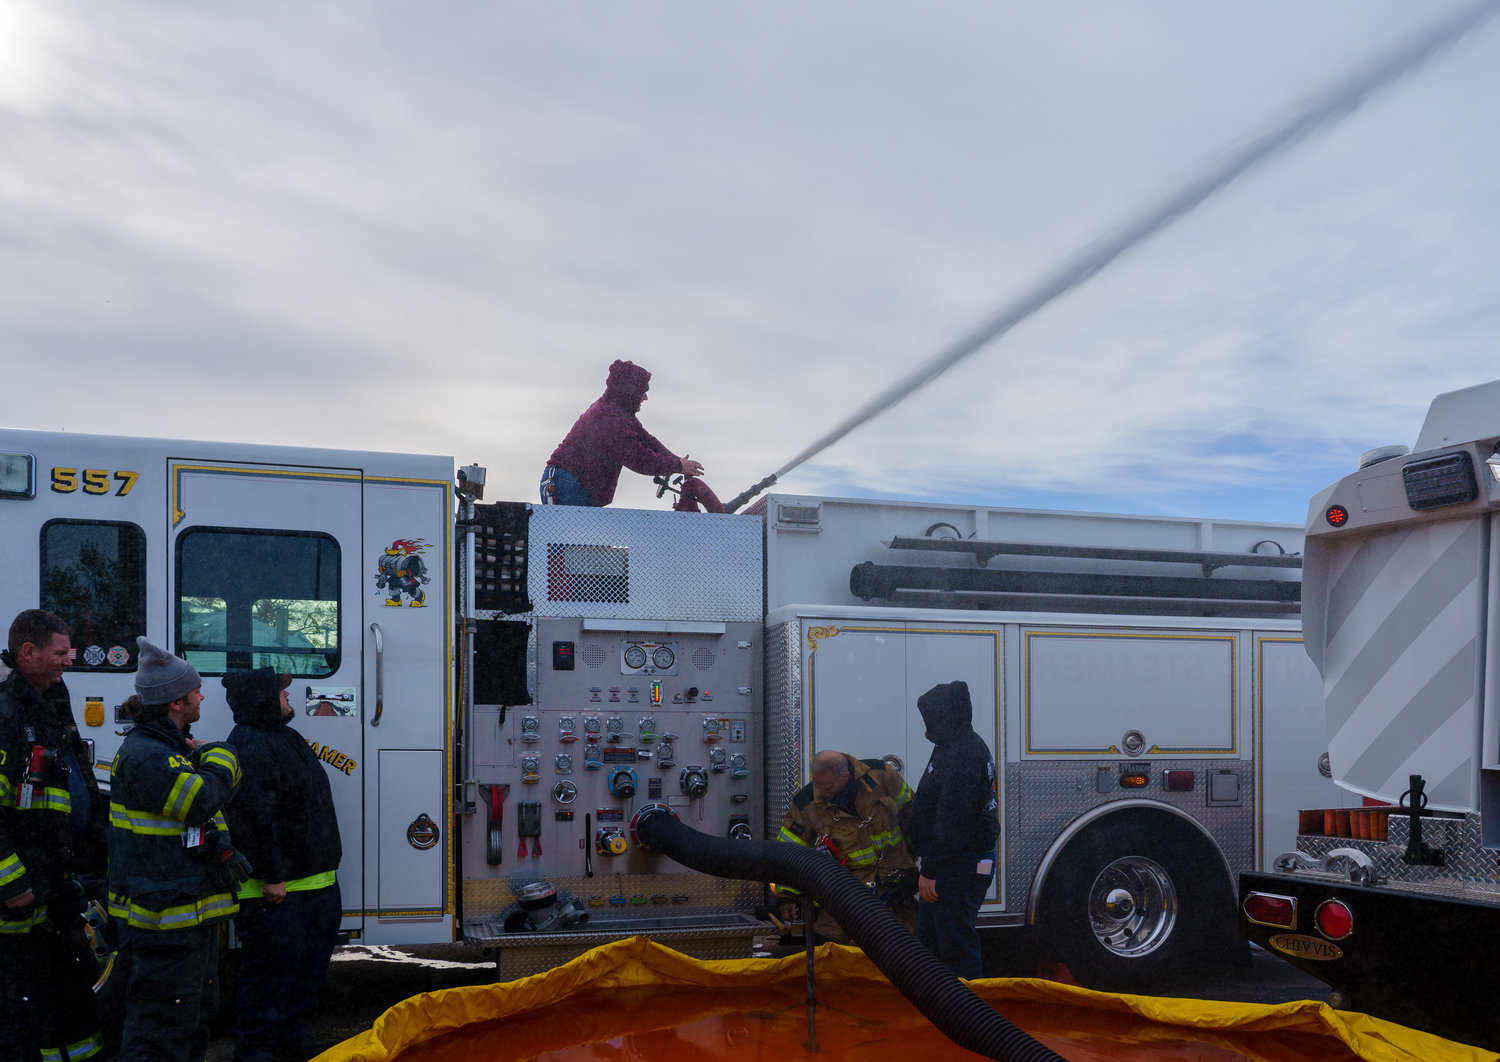 A large black hose on the side of a fire truck, left, is used to suck the water out of the pool and then to put out a fire.